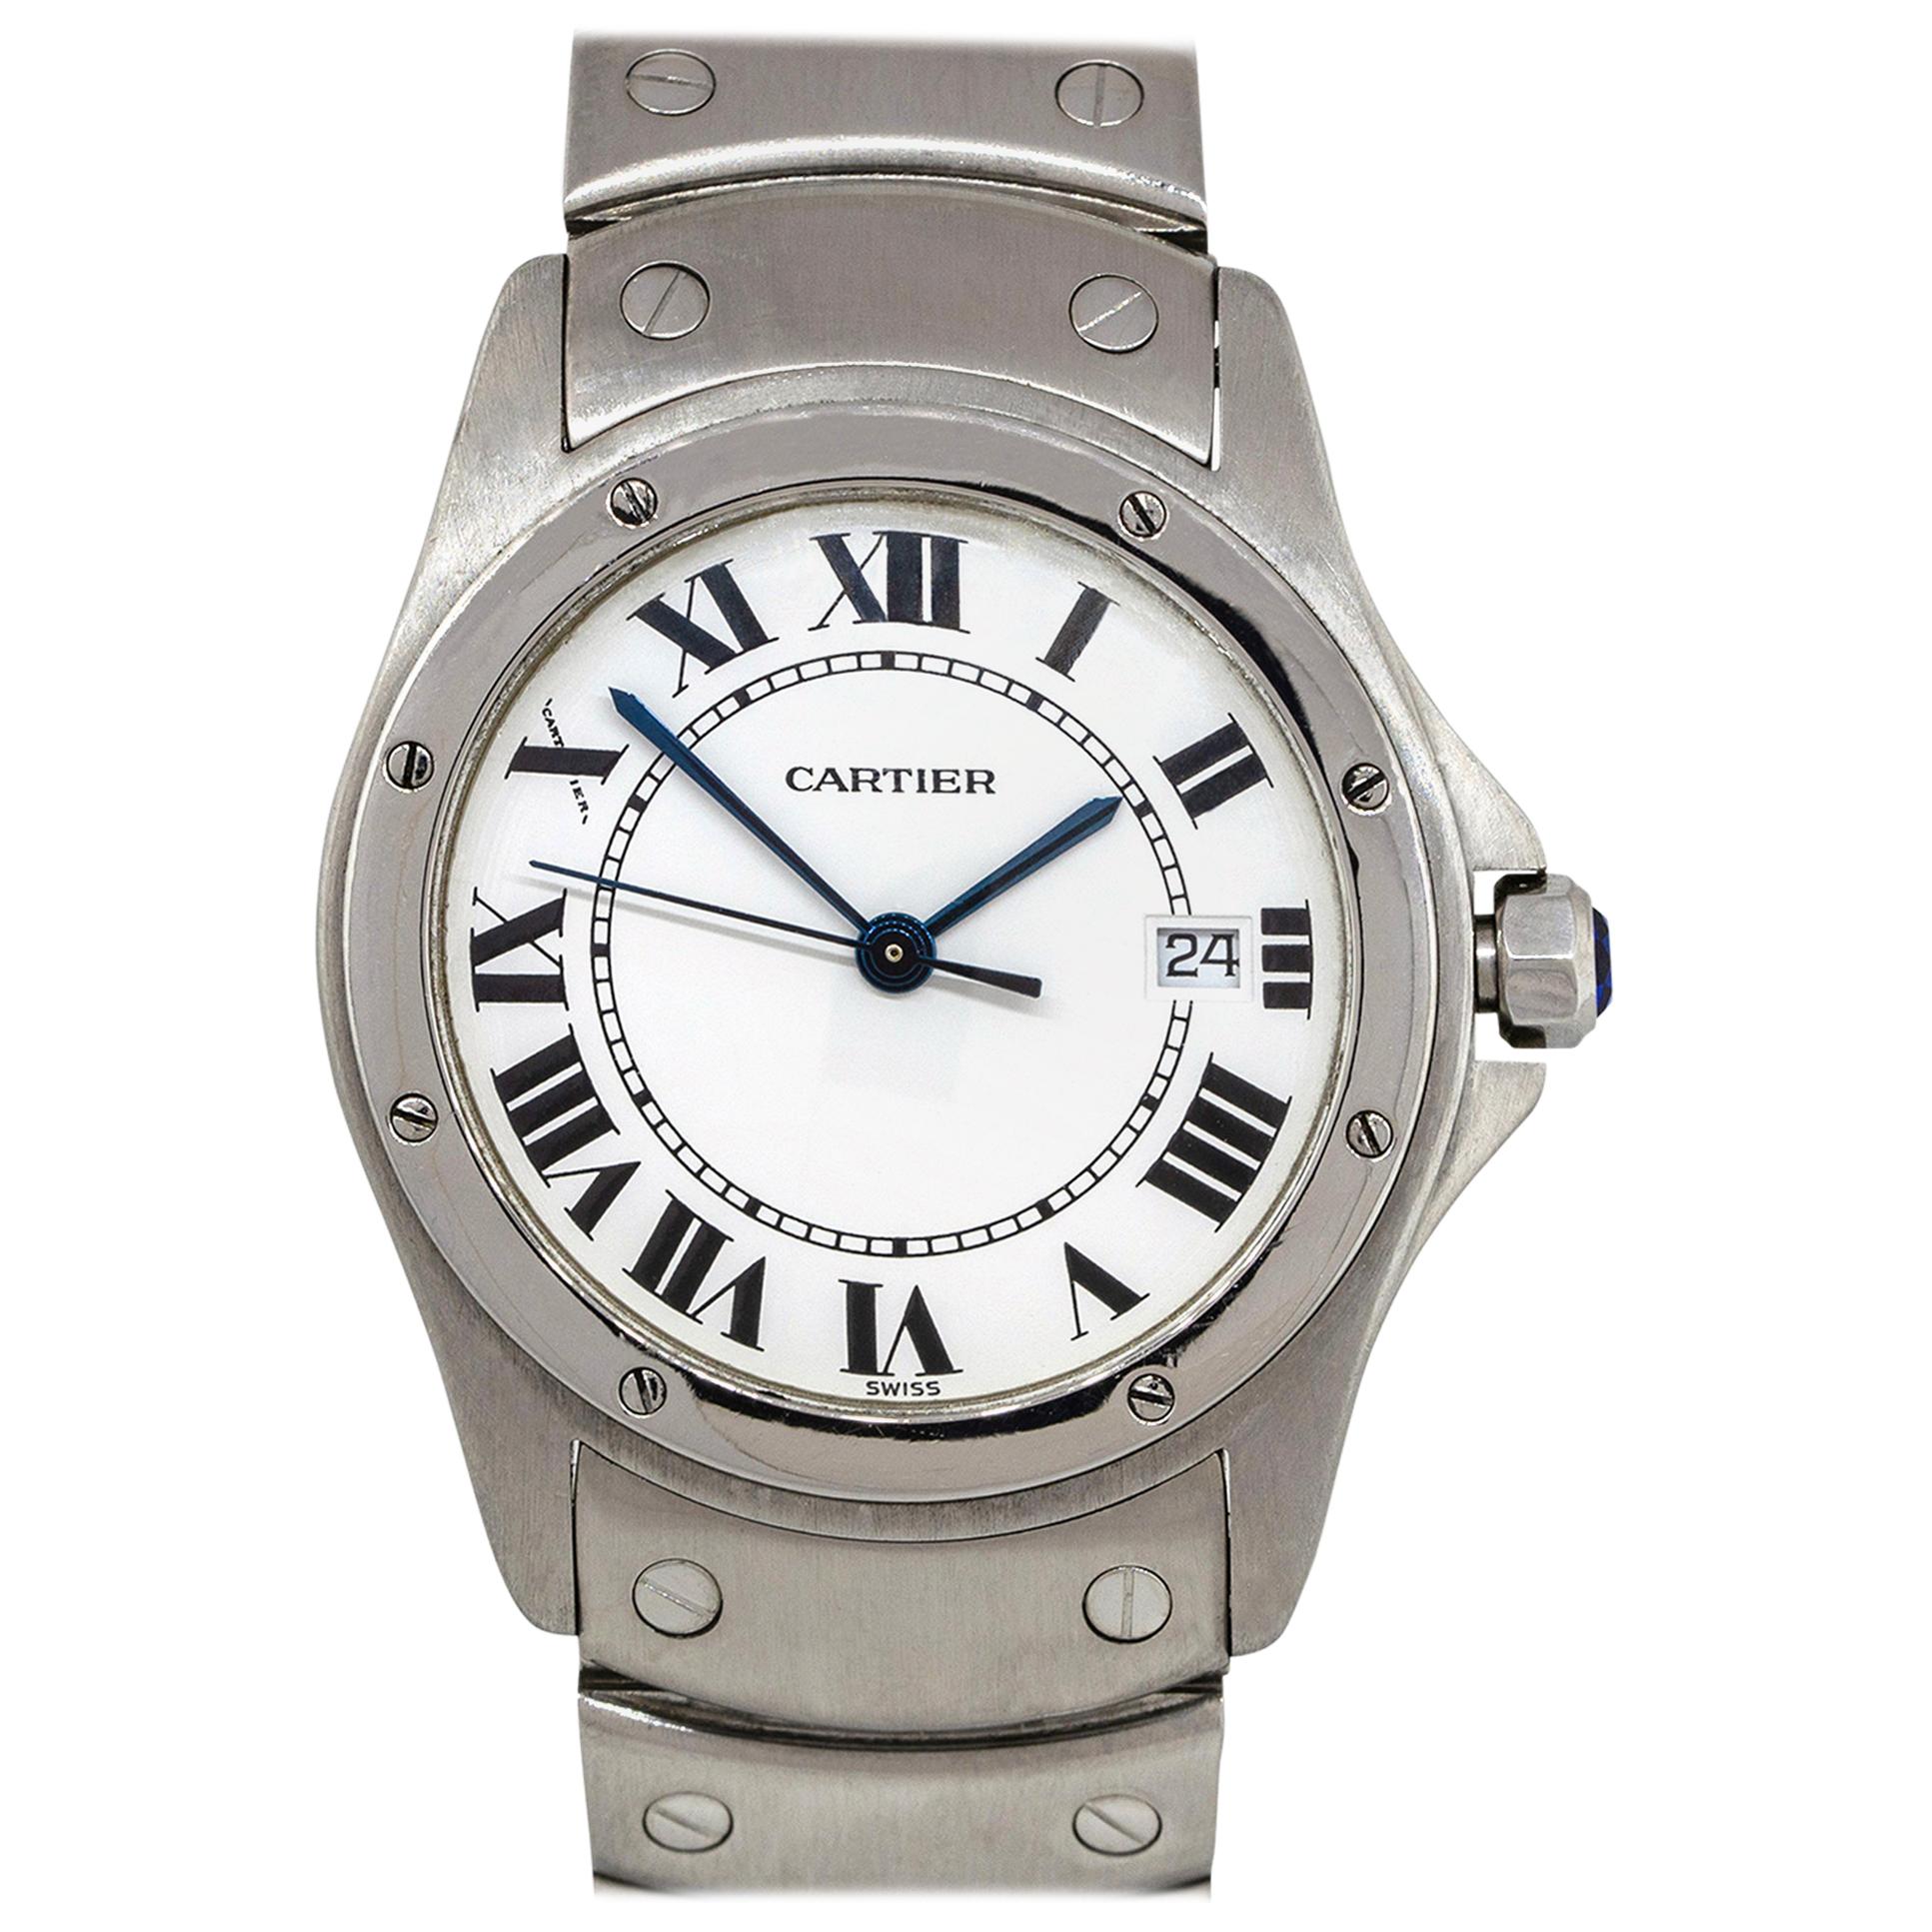 Cartier 1561 Santos Ronde Stainless Steel White Dial Watch